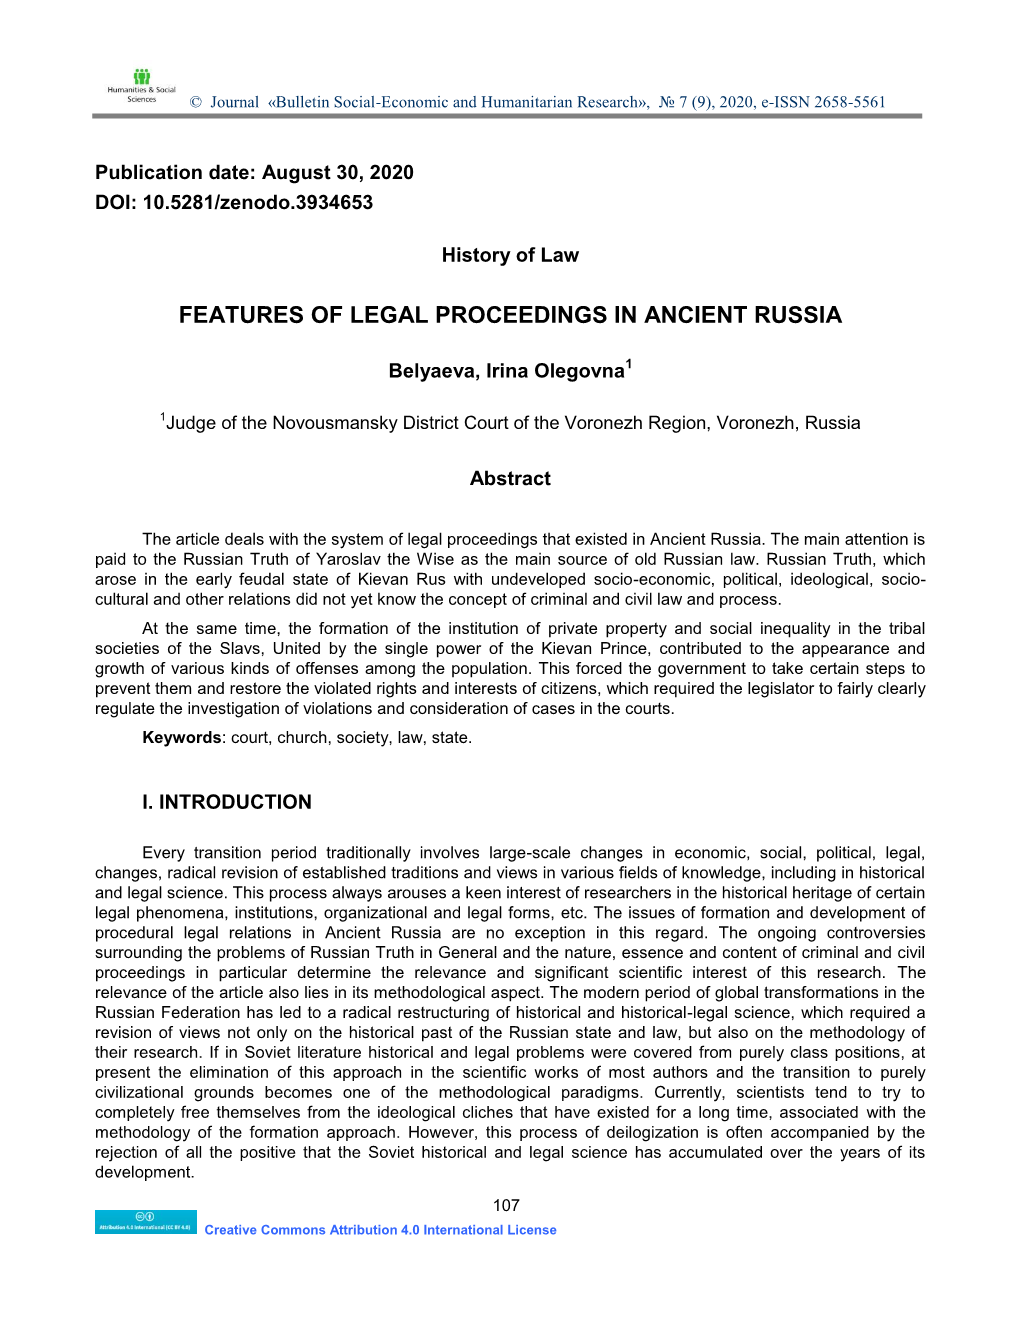 Features of Legal Proceedings in Ancient Russia